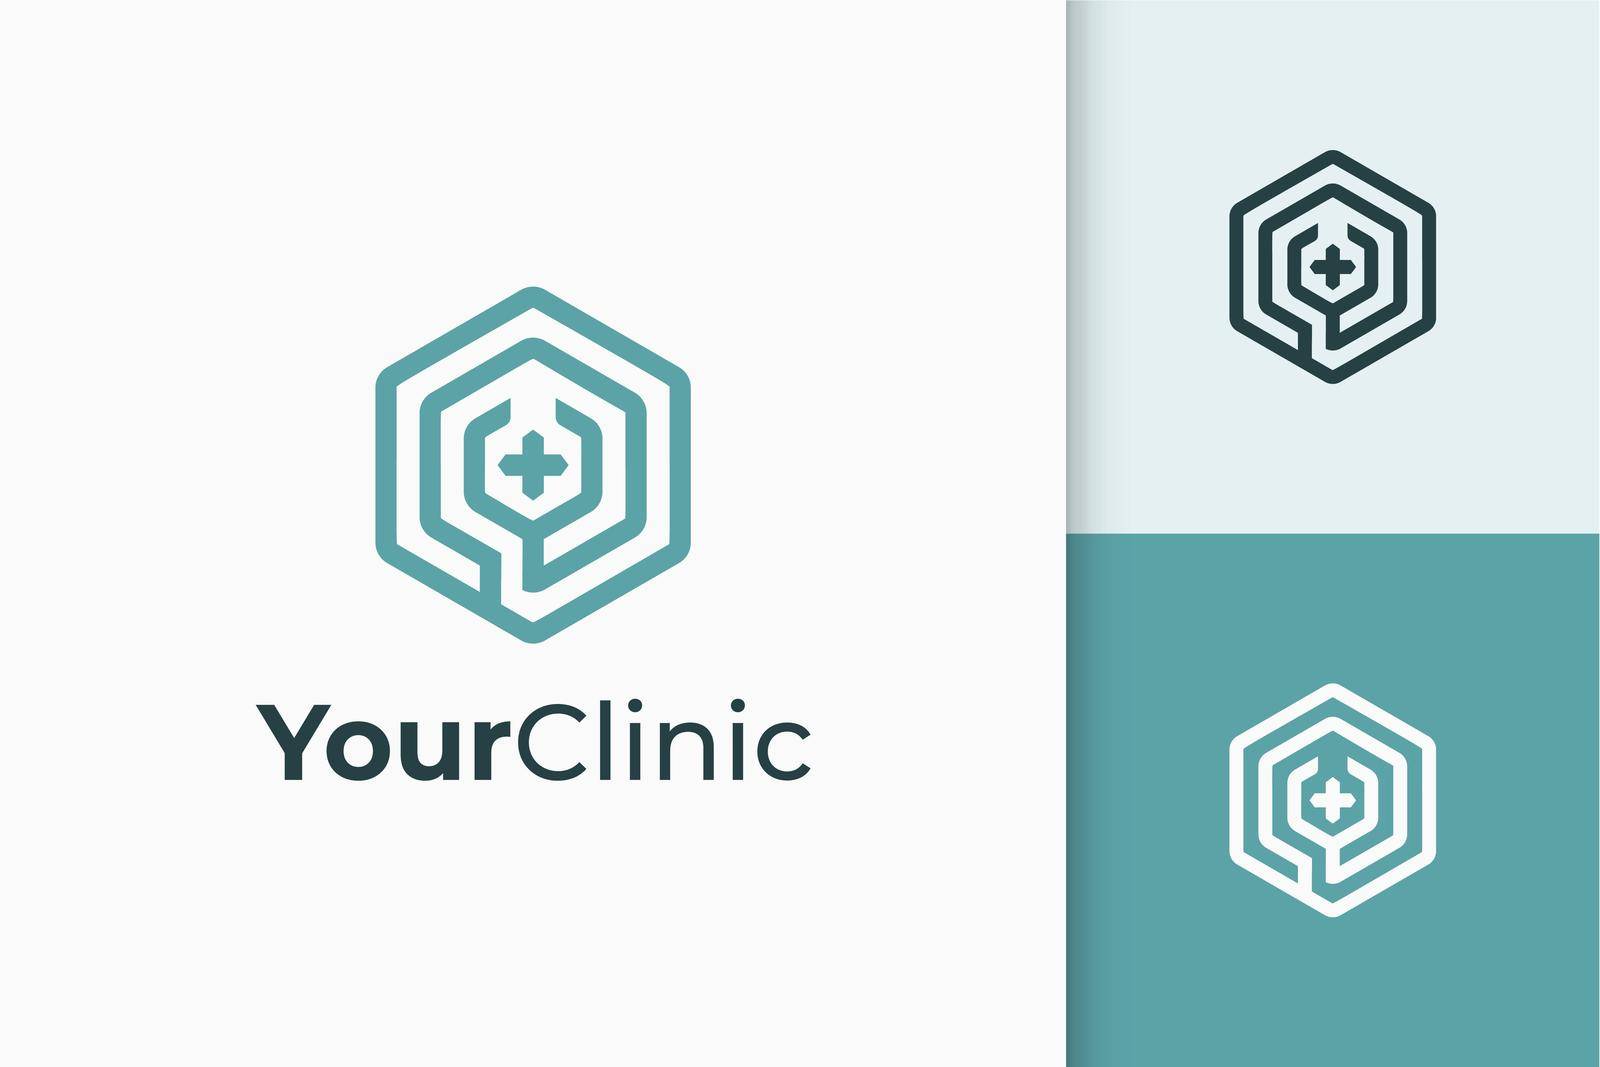 Clinic or apothecary logo in stethoscope shape